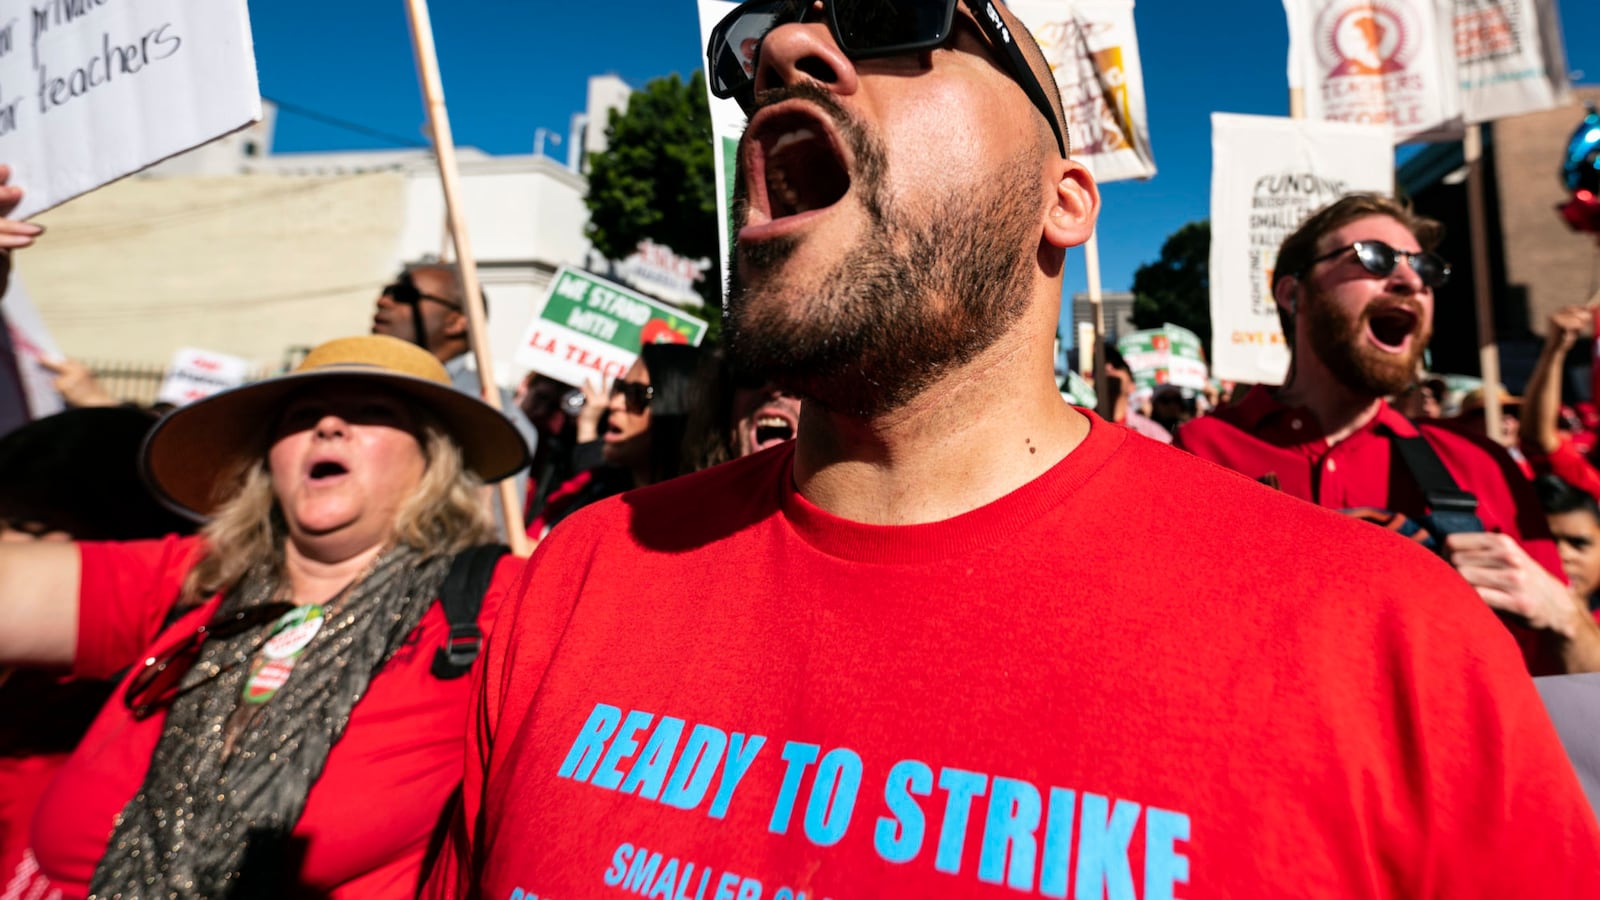 Teachers and supporters of public education march against education funding cuts during the March for Public Education in Los Angeles, California on December 15, 2018. The rally, organized by United Teachers Los Angeles, drew thousands of educators who demanded wage increases and smaller class sizes. (Photo by Ronen Tivony/NurPhoto via Getty Images)